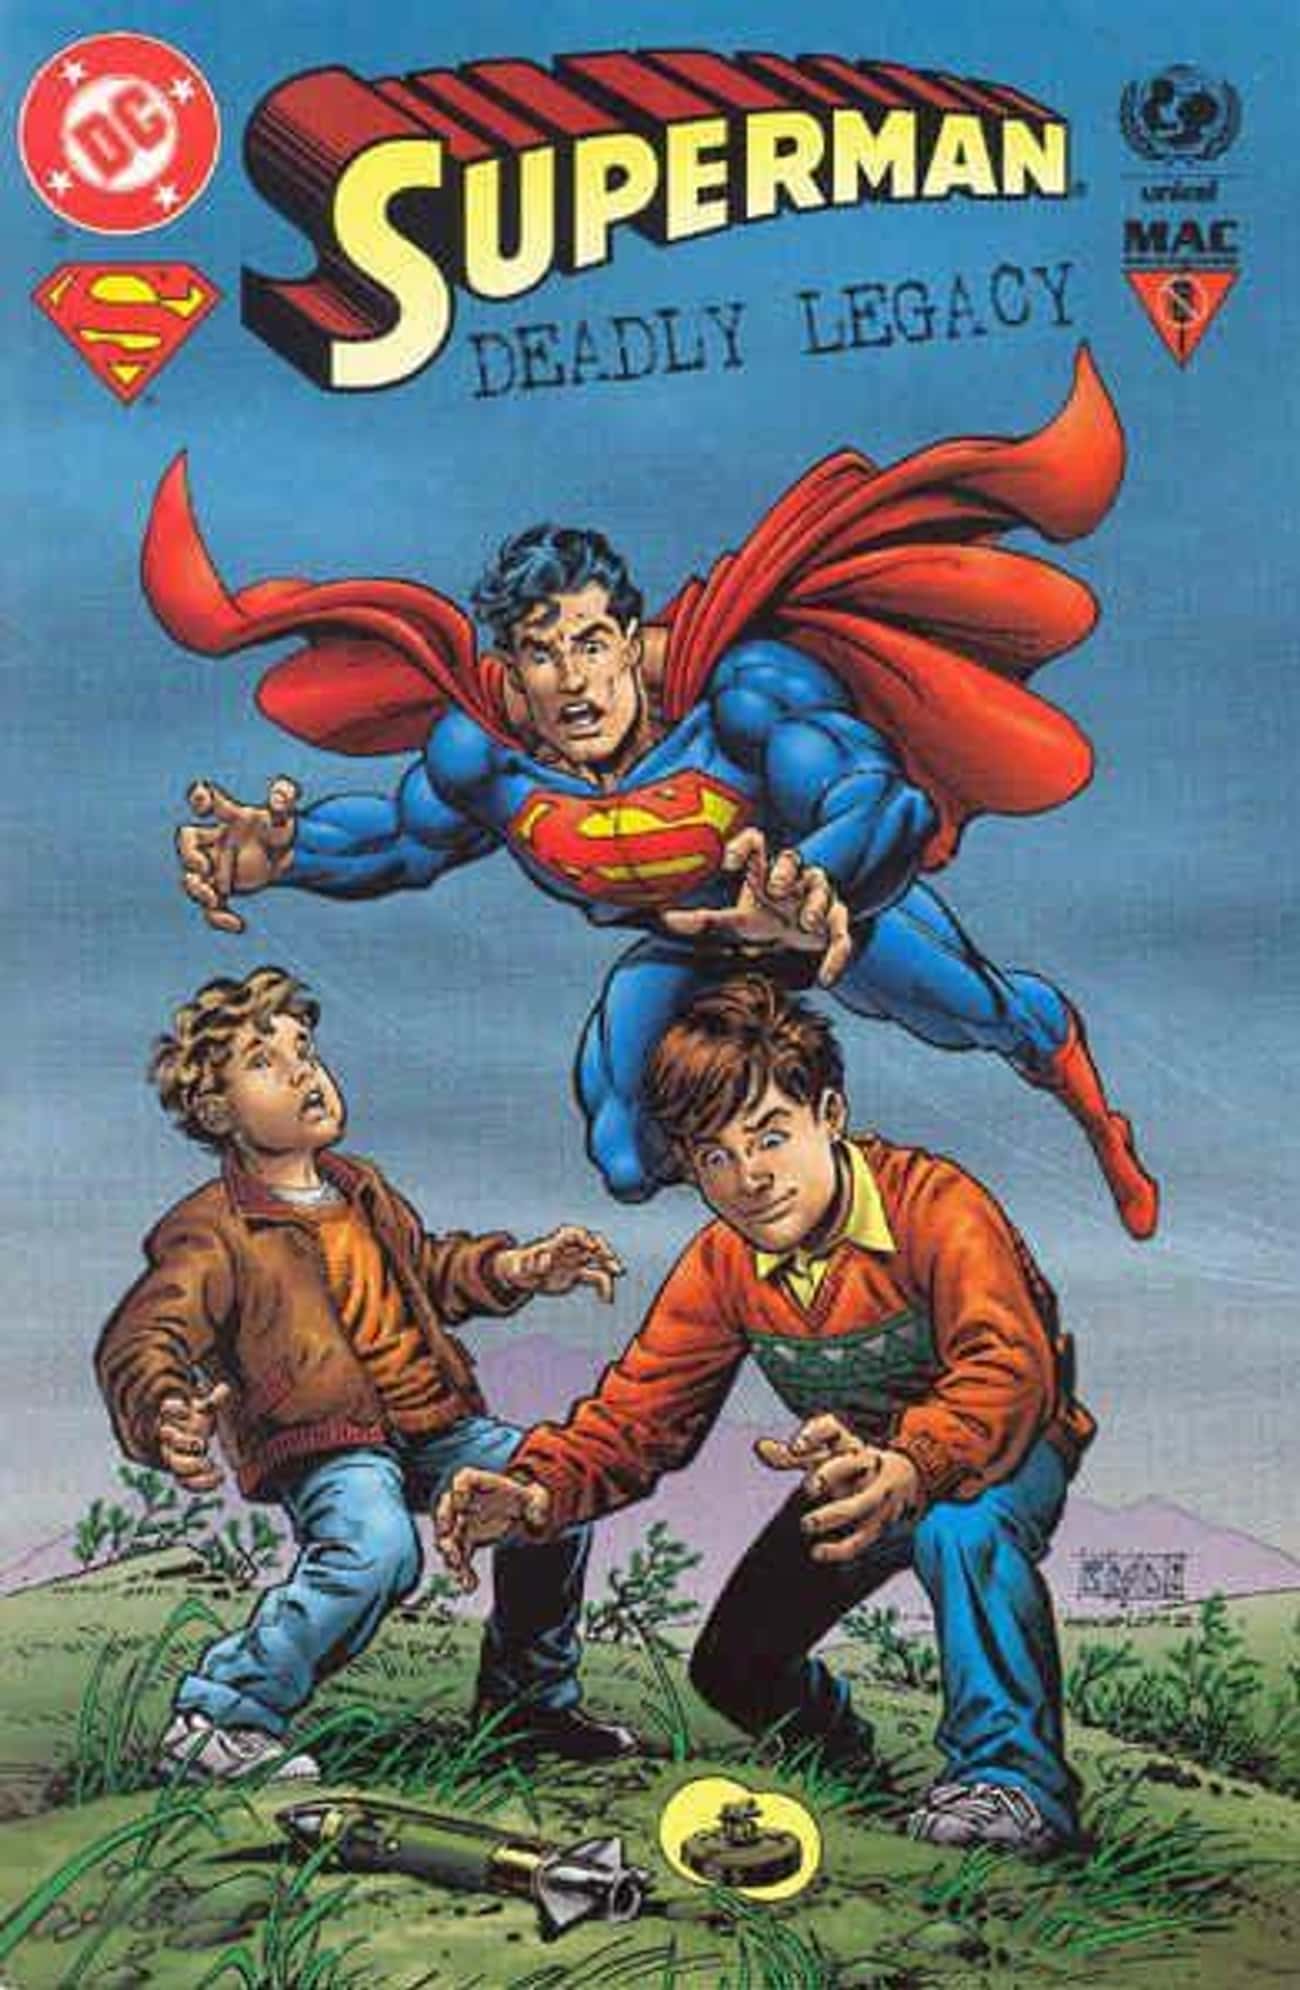 Superman Tried To Protect Real World Children From Land Mines